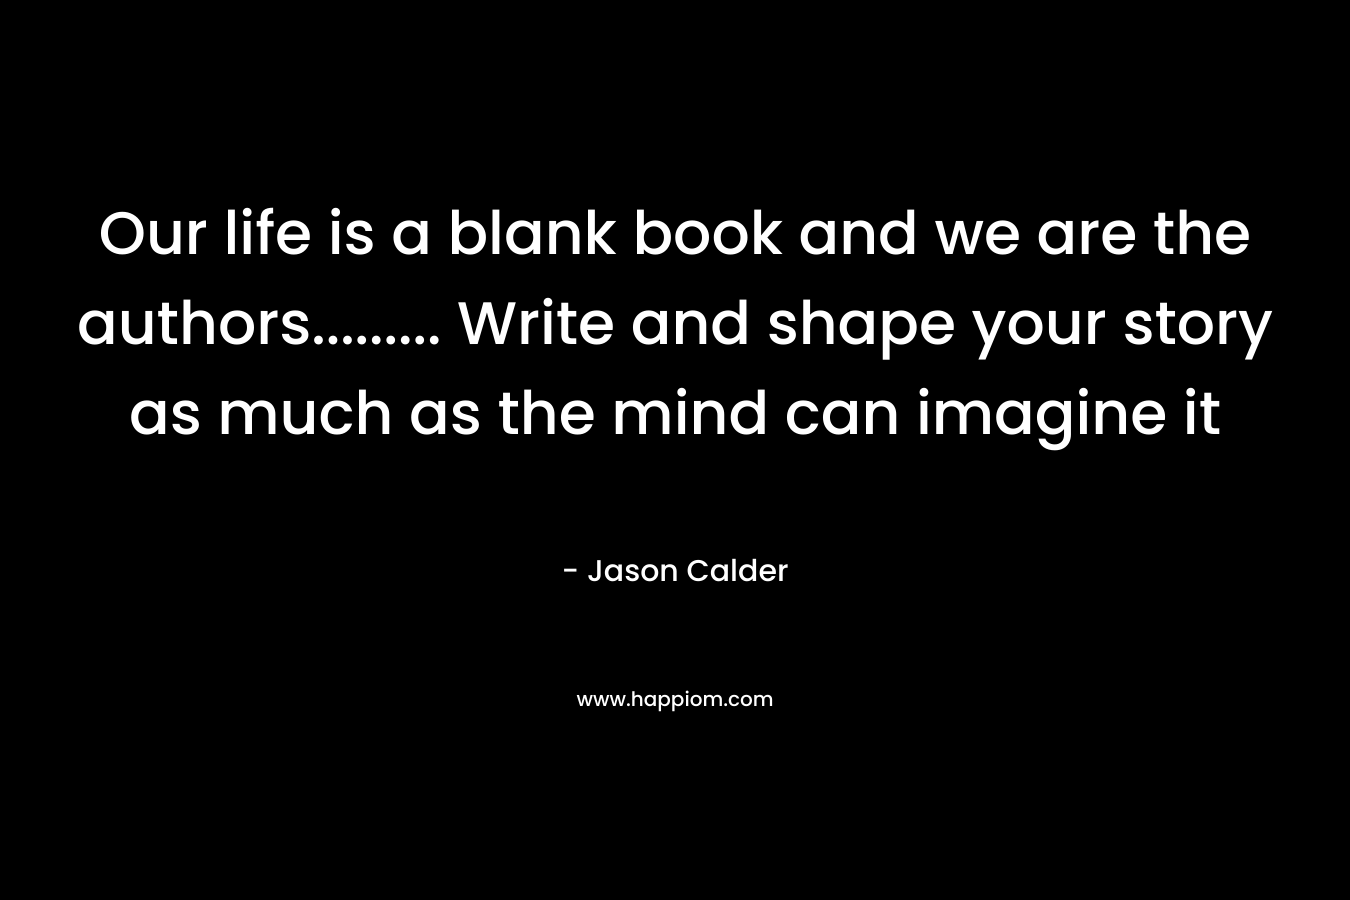 Our life is a blank book and we are the authors......... Write and shape your story as much as the mind can imagine it